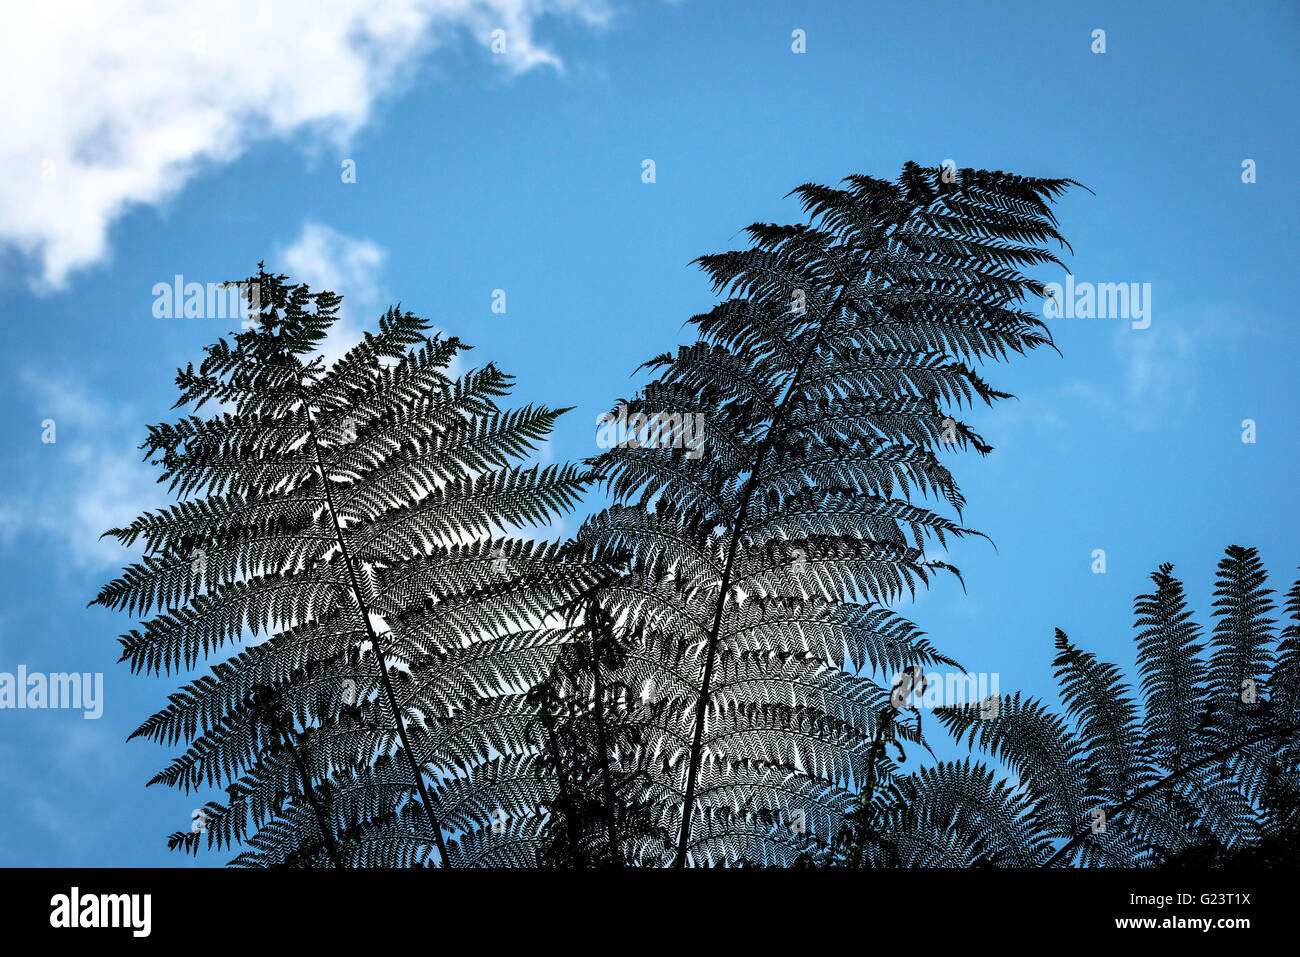 The silhouette of Tree Fern fronds against a blue sky. Stock Photo